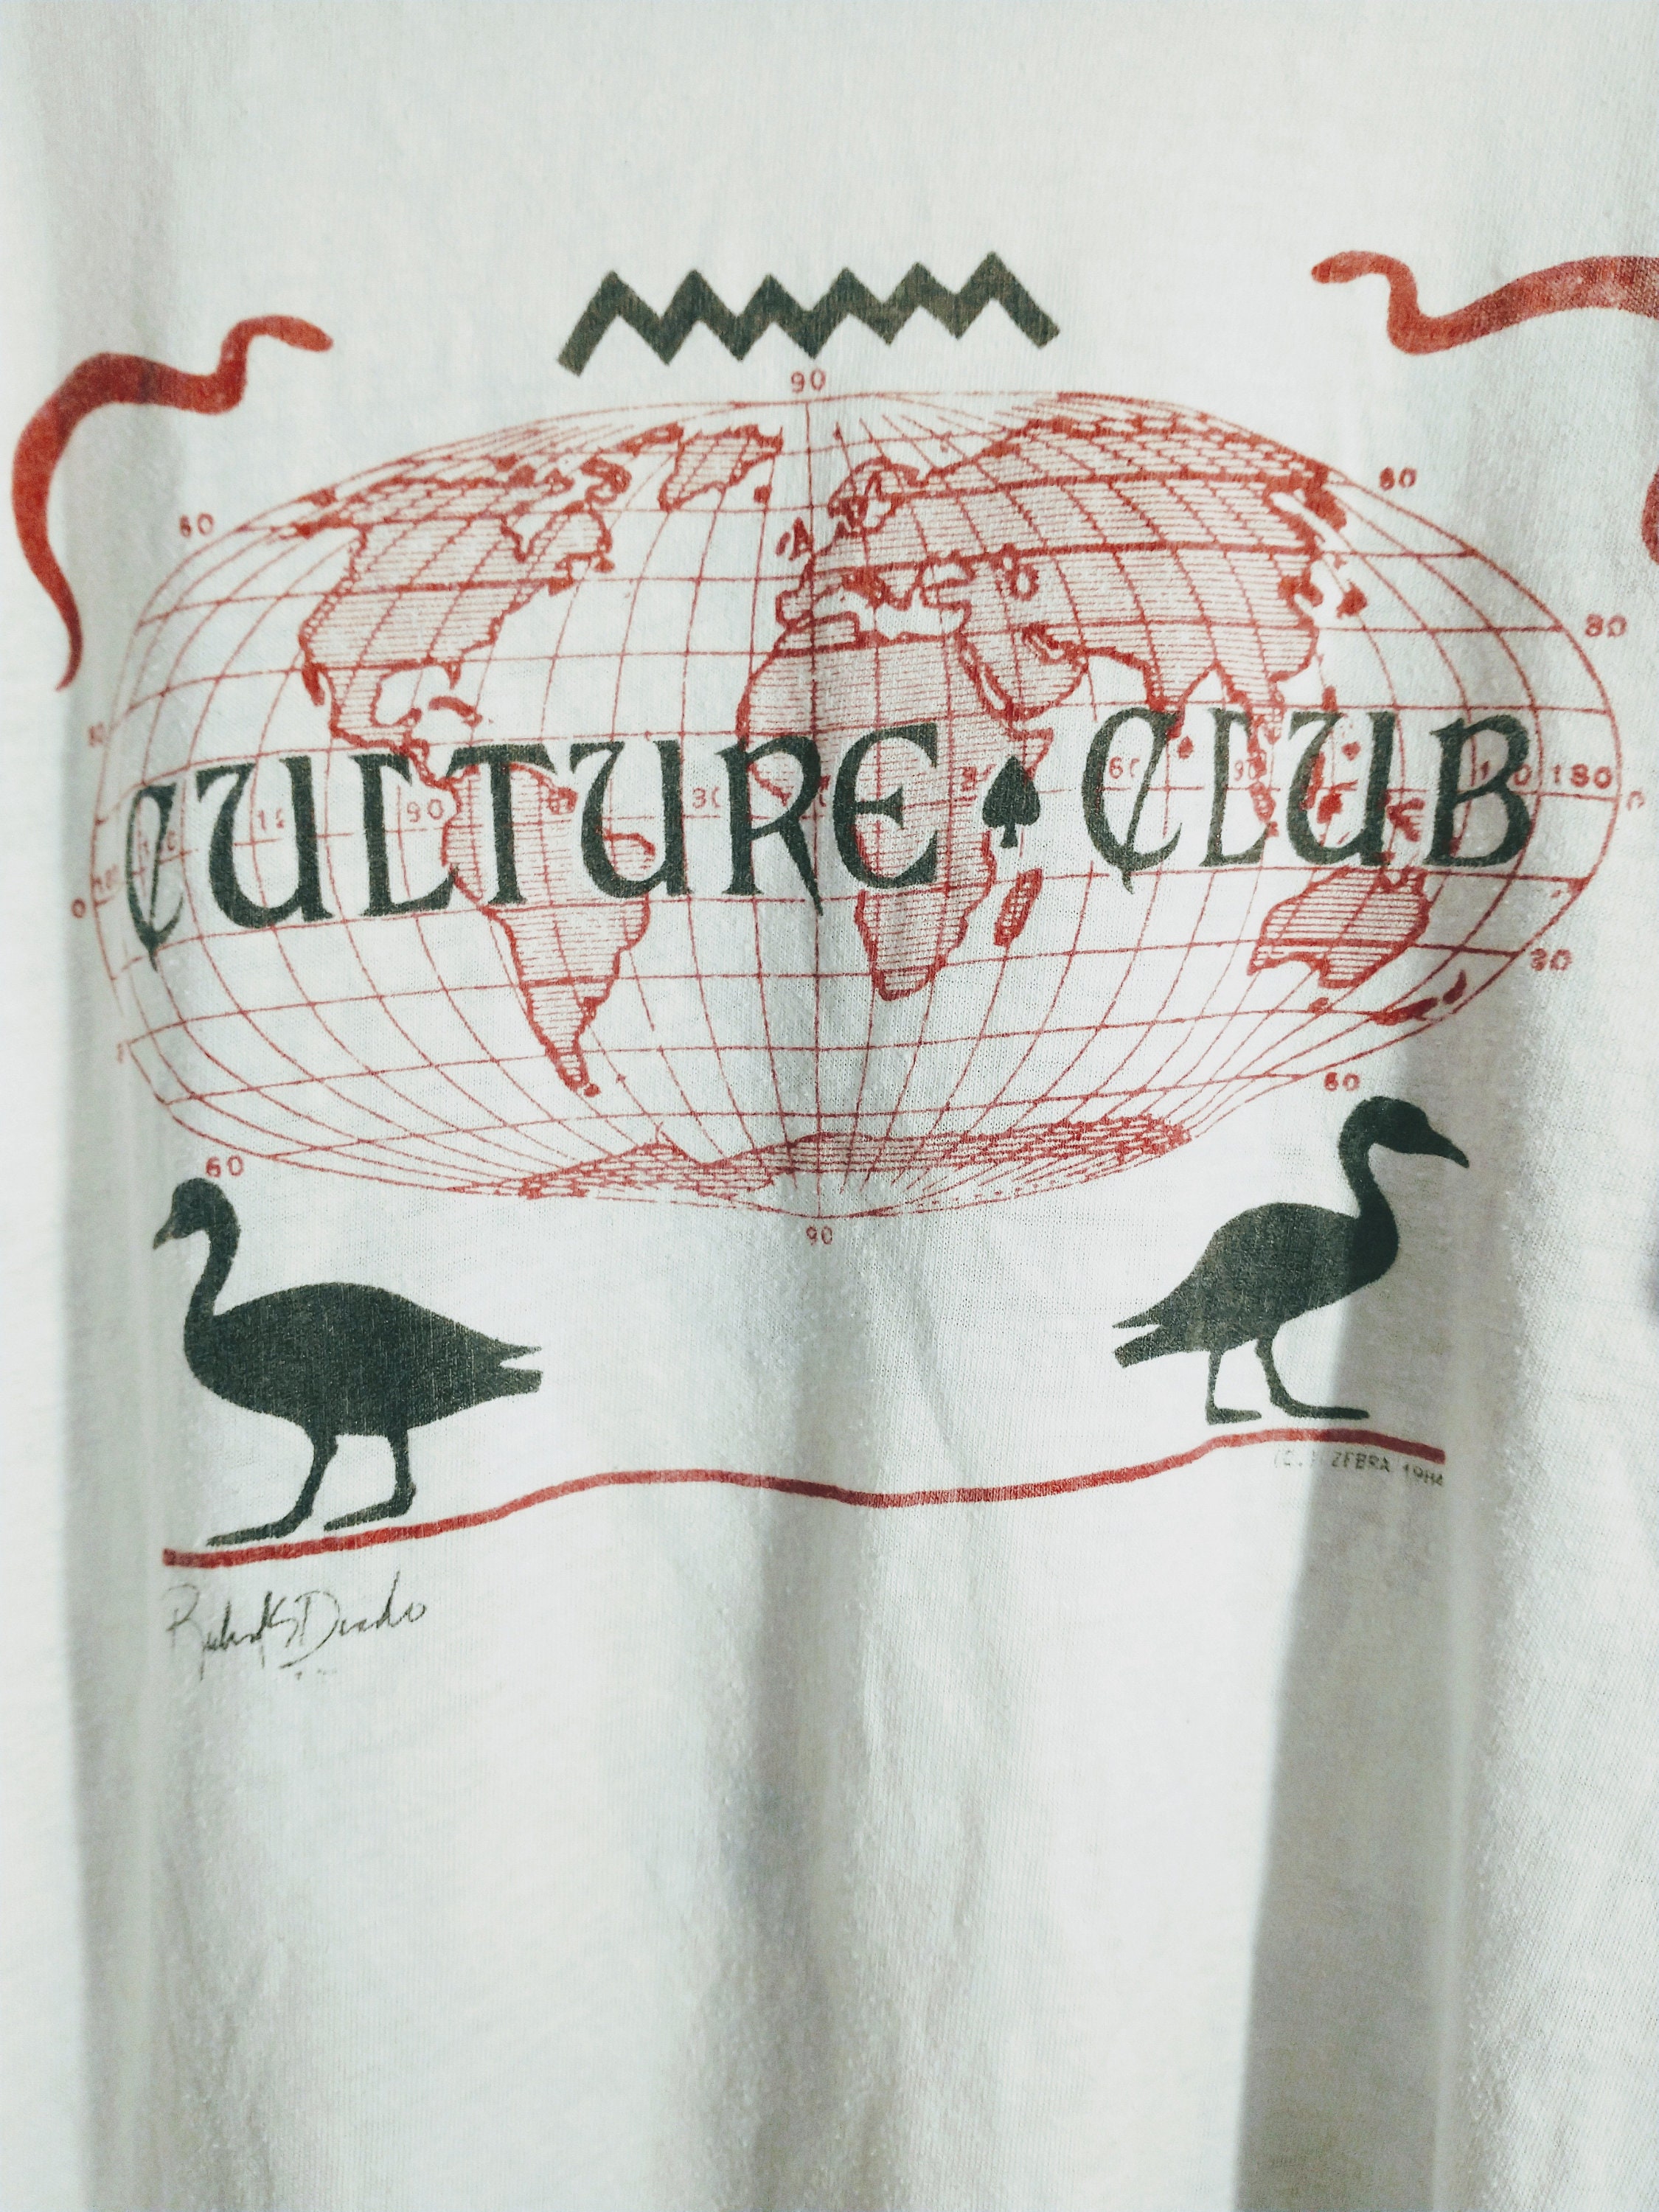 Boy George  Culture Club Concert T Shirt Authentic Vintage 84 Support of Colour By NumbersLP Boy George,A Kiss Across The Ocean Tour